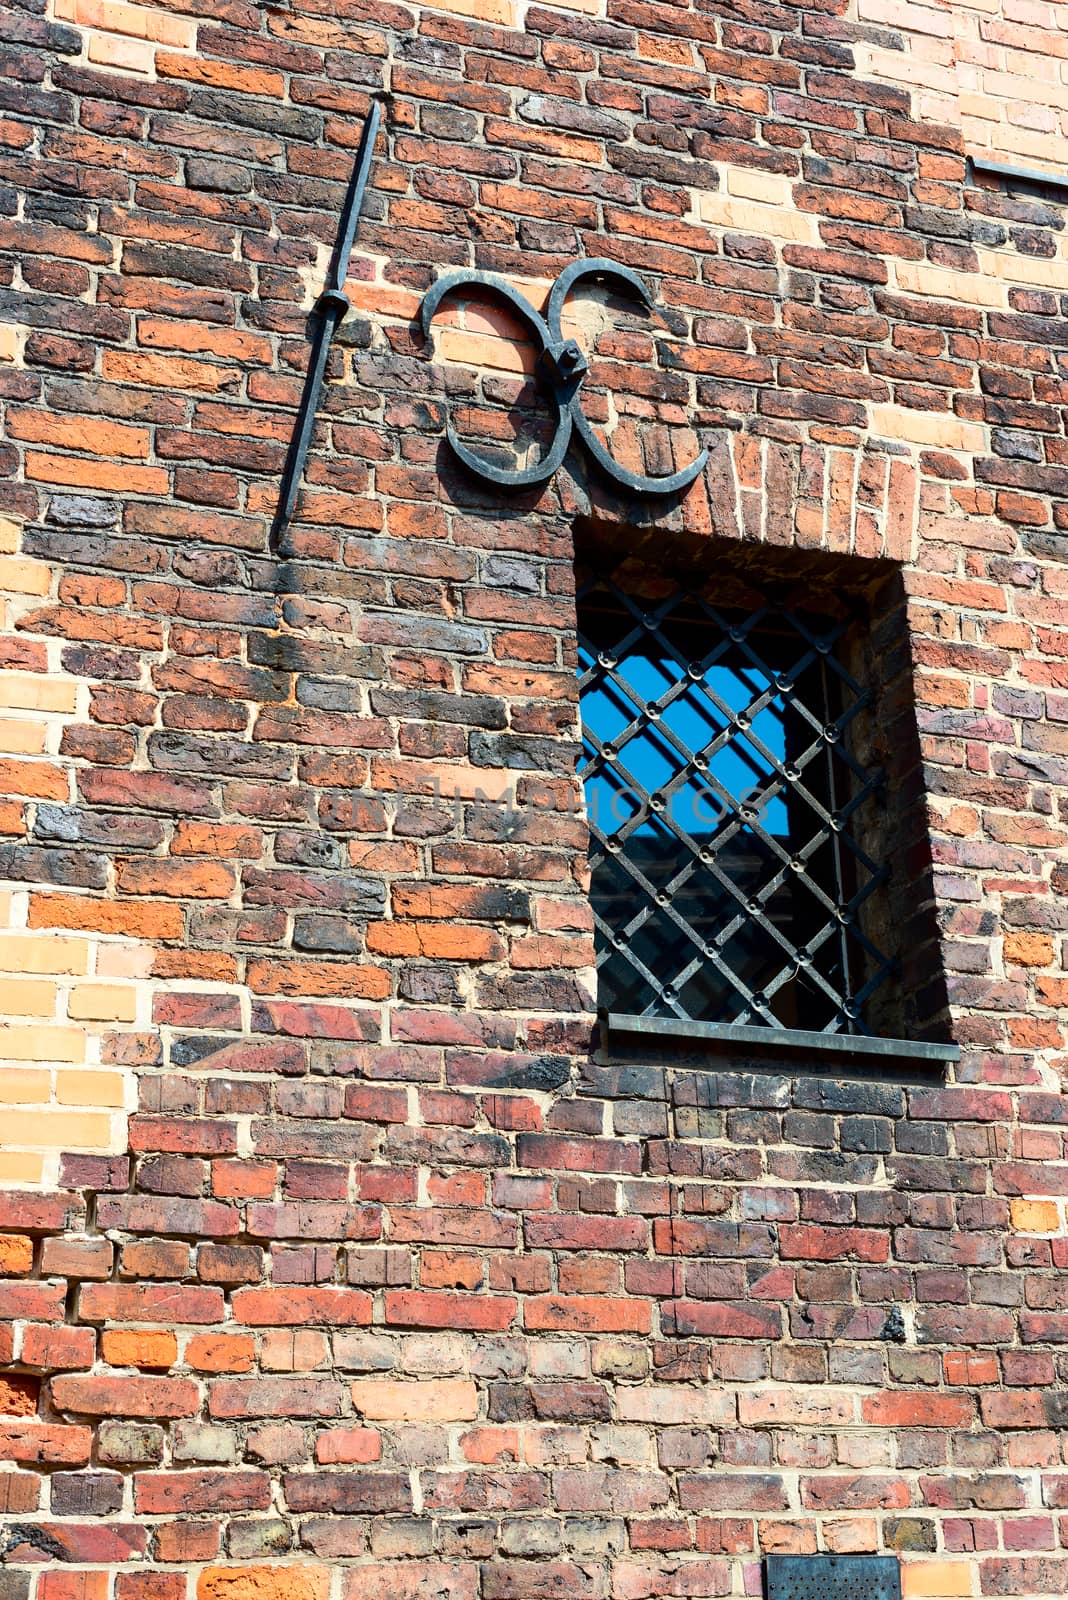 Small barred window in an old brick wall. The metal bars of the  by DNKSTUDIO